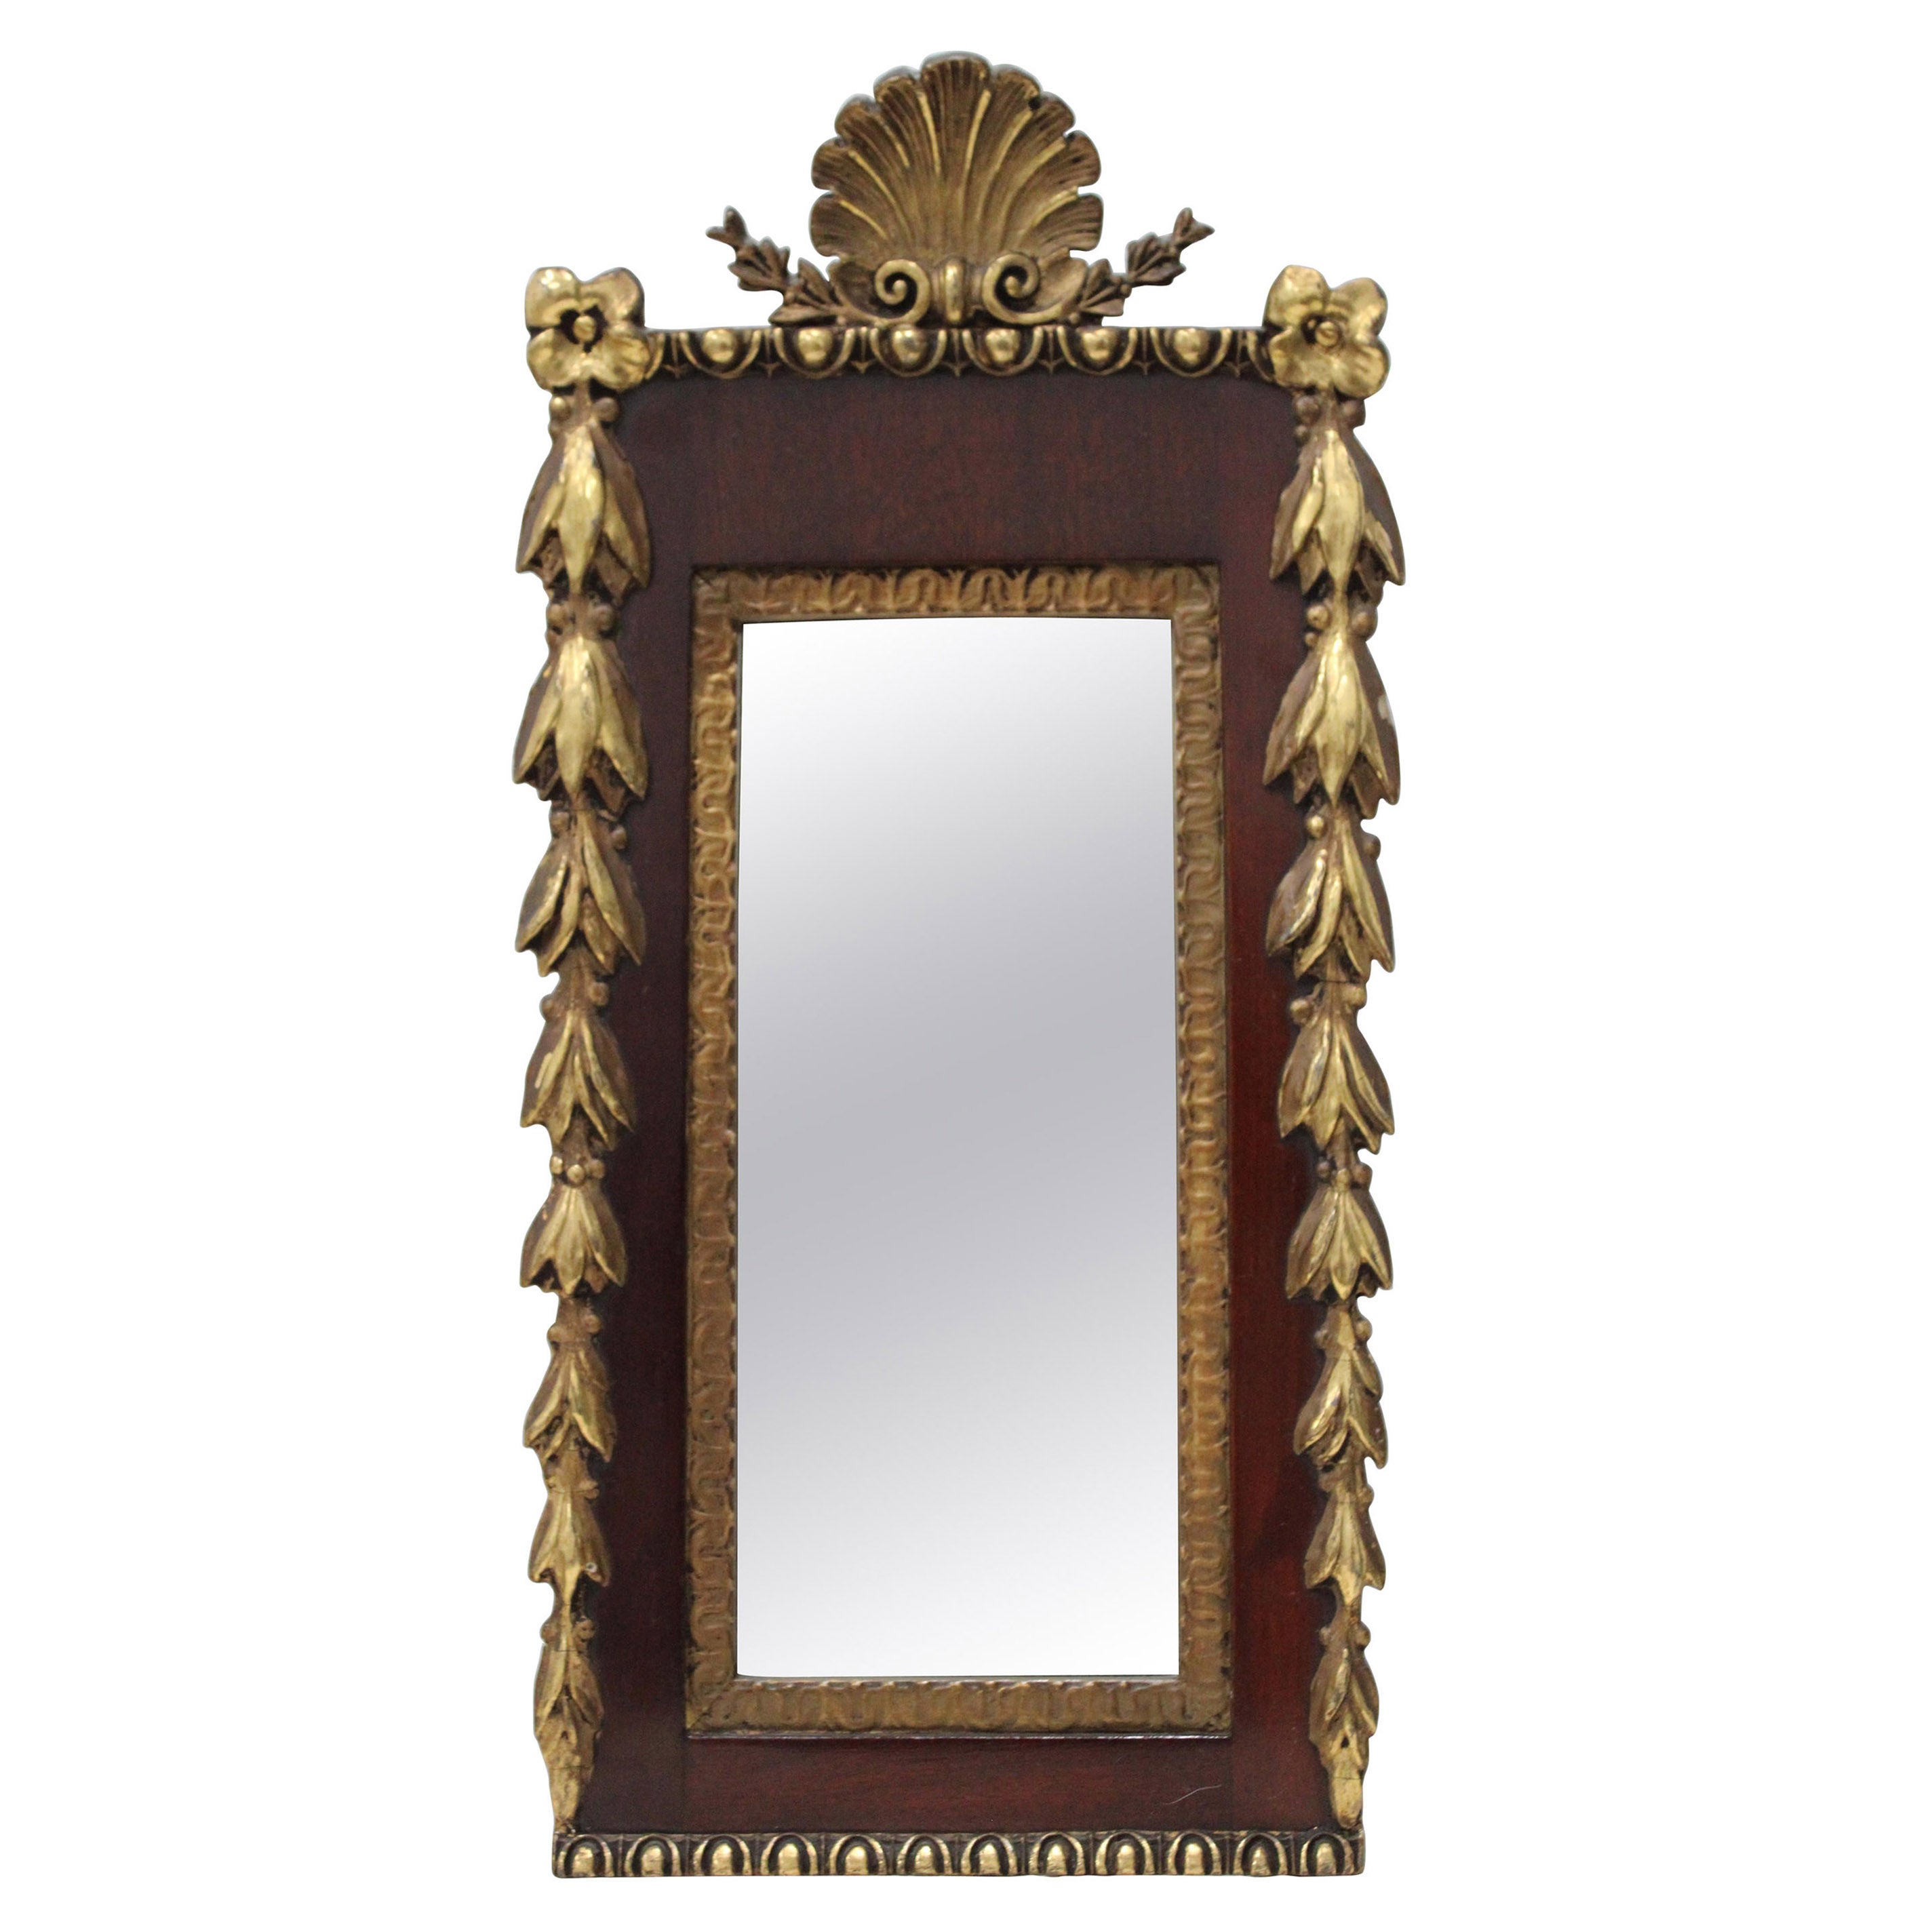 Rare Sized, Carved & Gilt Empire Mirror w/ Shell Top For Sale